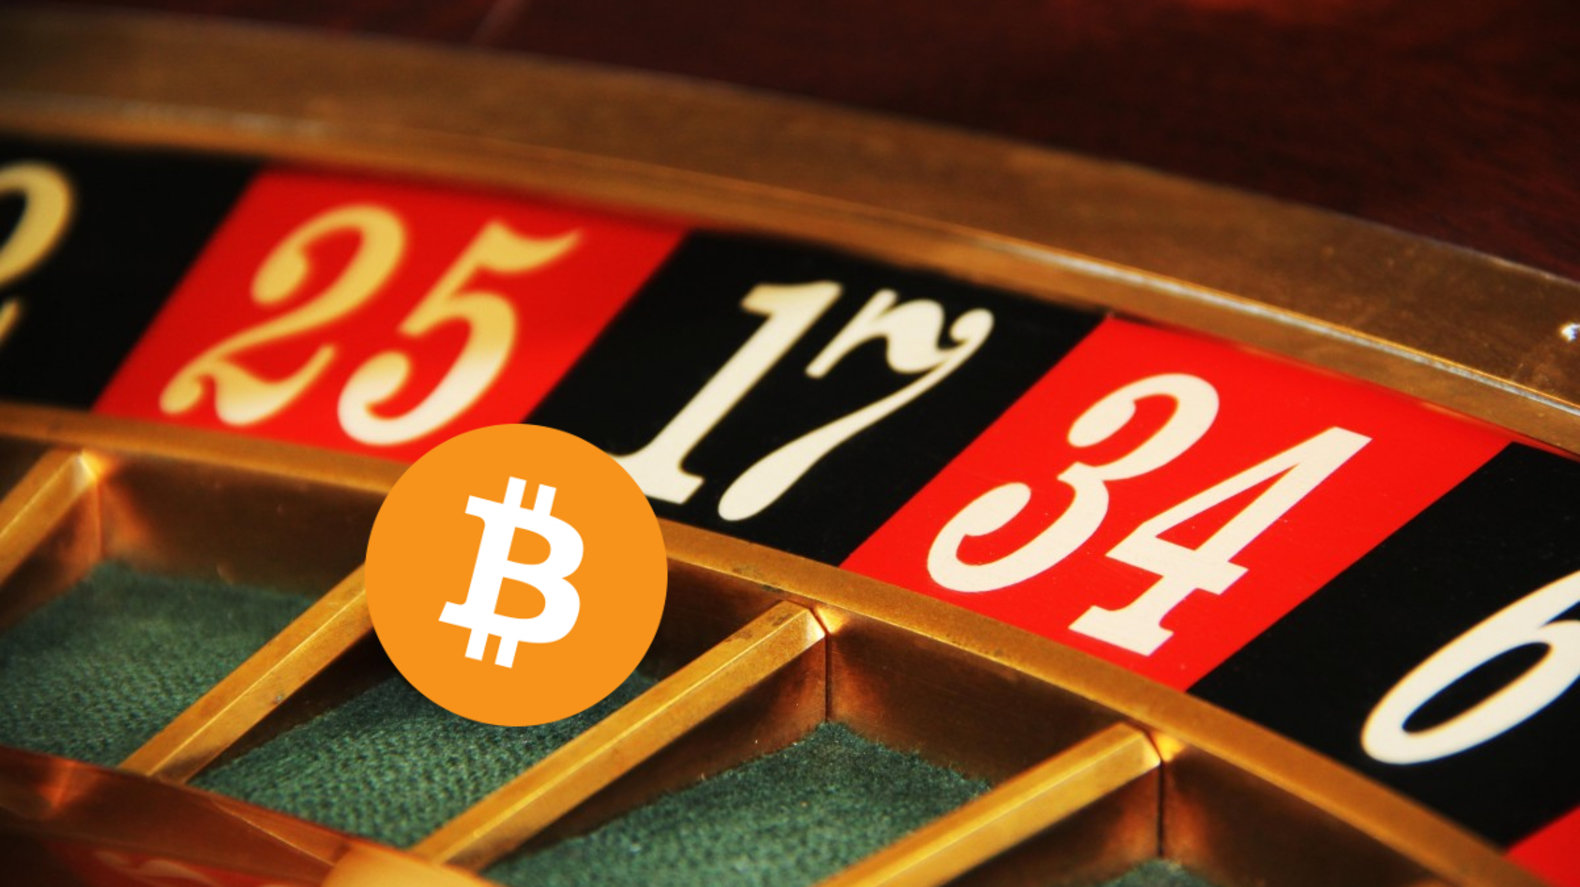 Chinese Spider Slot Machine Now Available on Bitcoin Casino